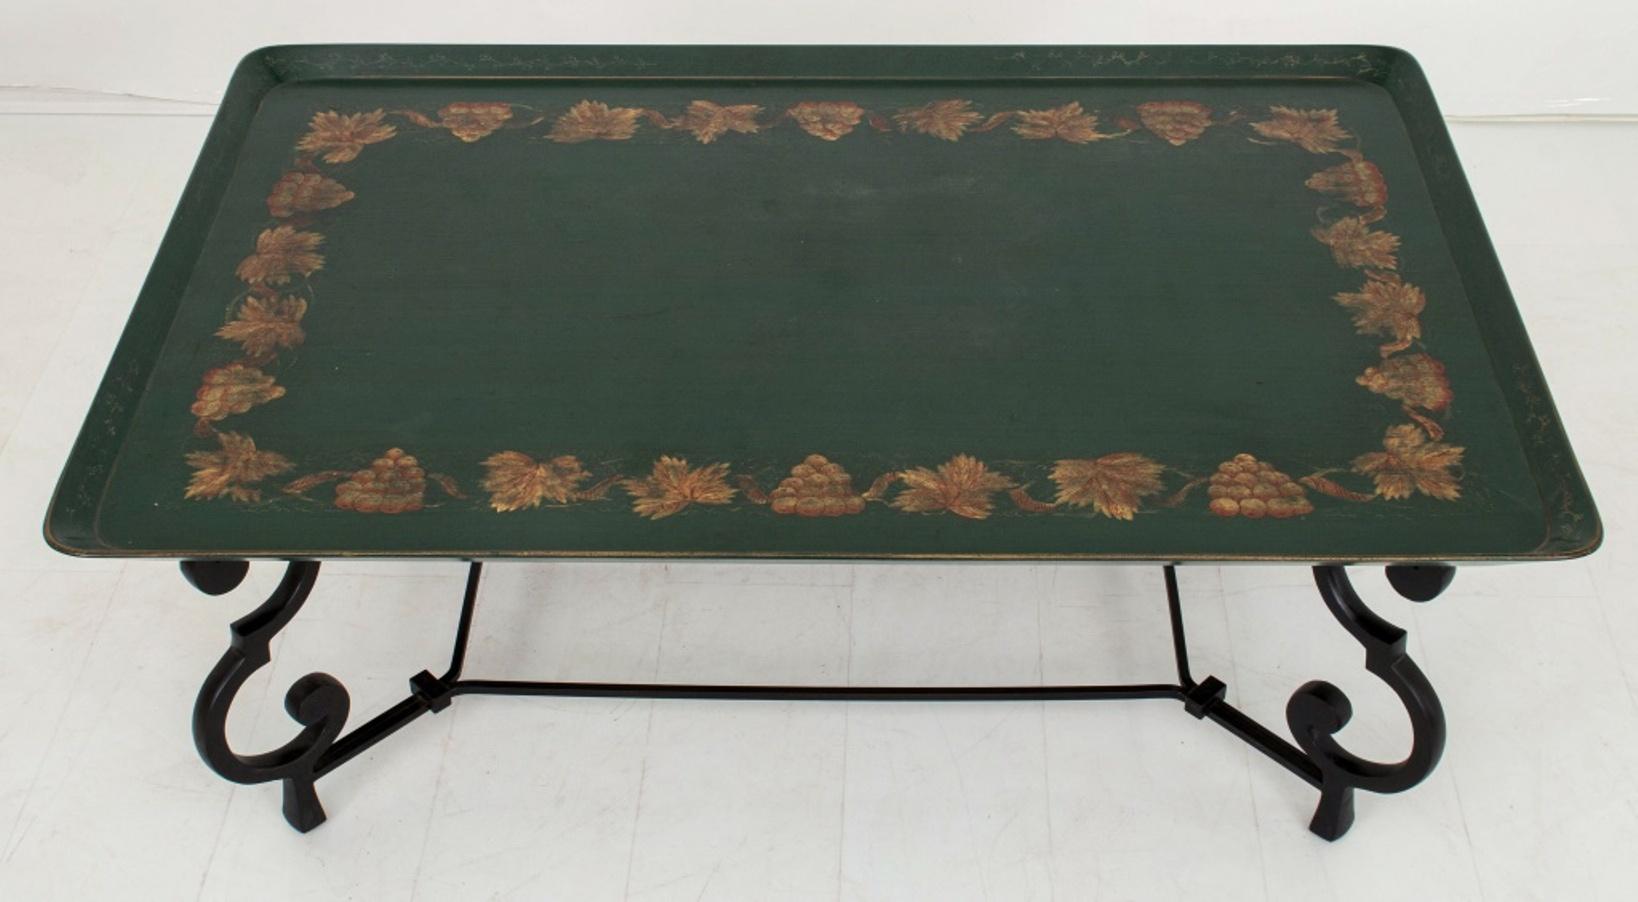 Maison Ramsay manner wrought iron tray table, with a rectangular tray-form top lacquered green with giltwork decoration in the manner of tole peinte, above chamfered corners above scroll supports conjoined by a rectangular stretcher on square